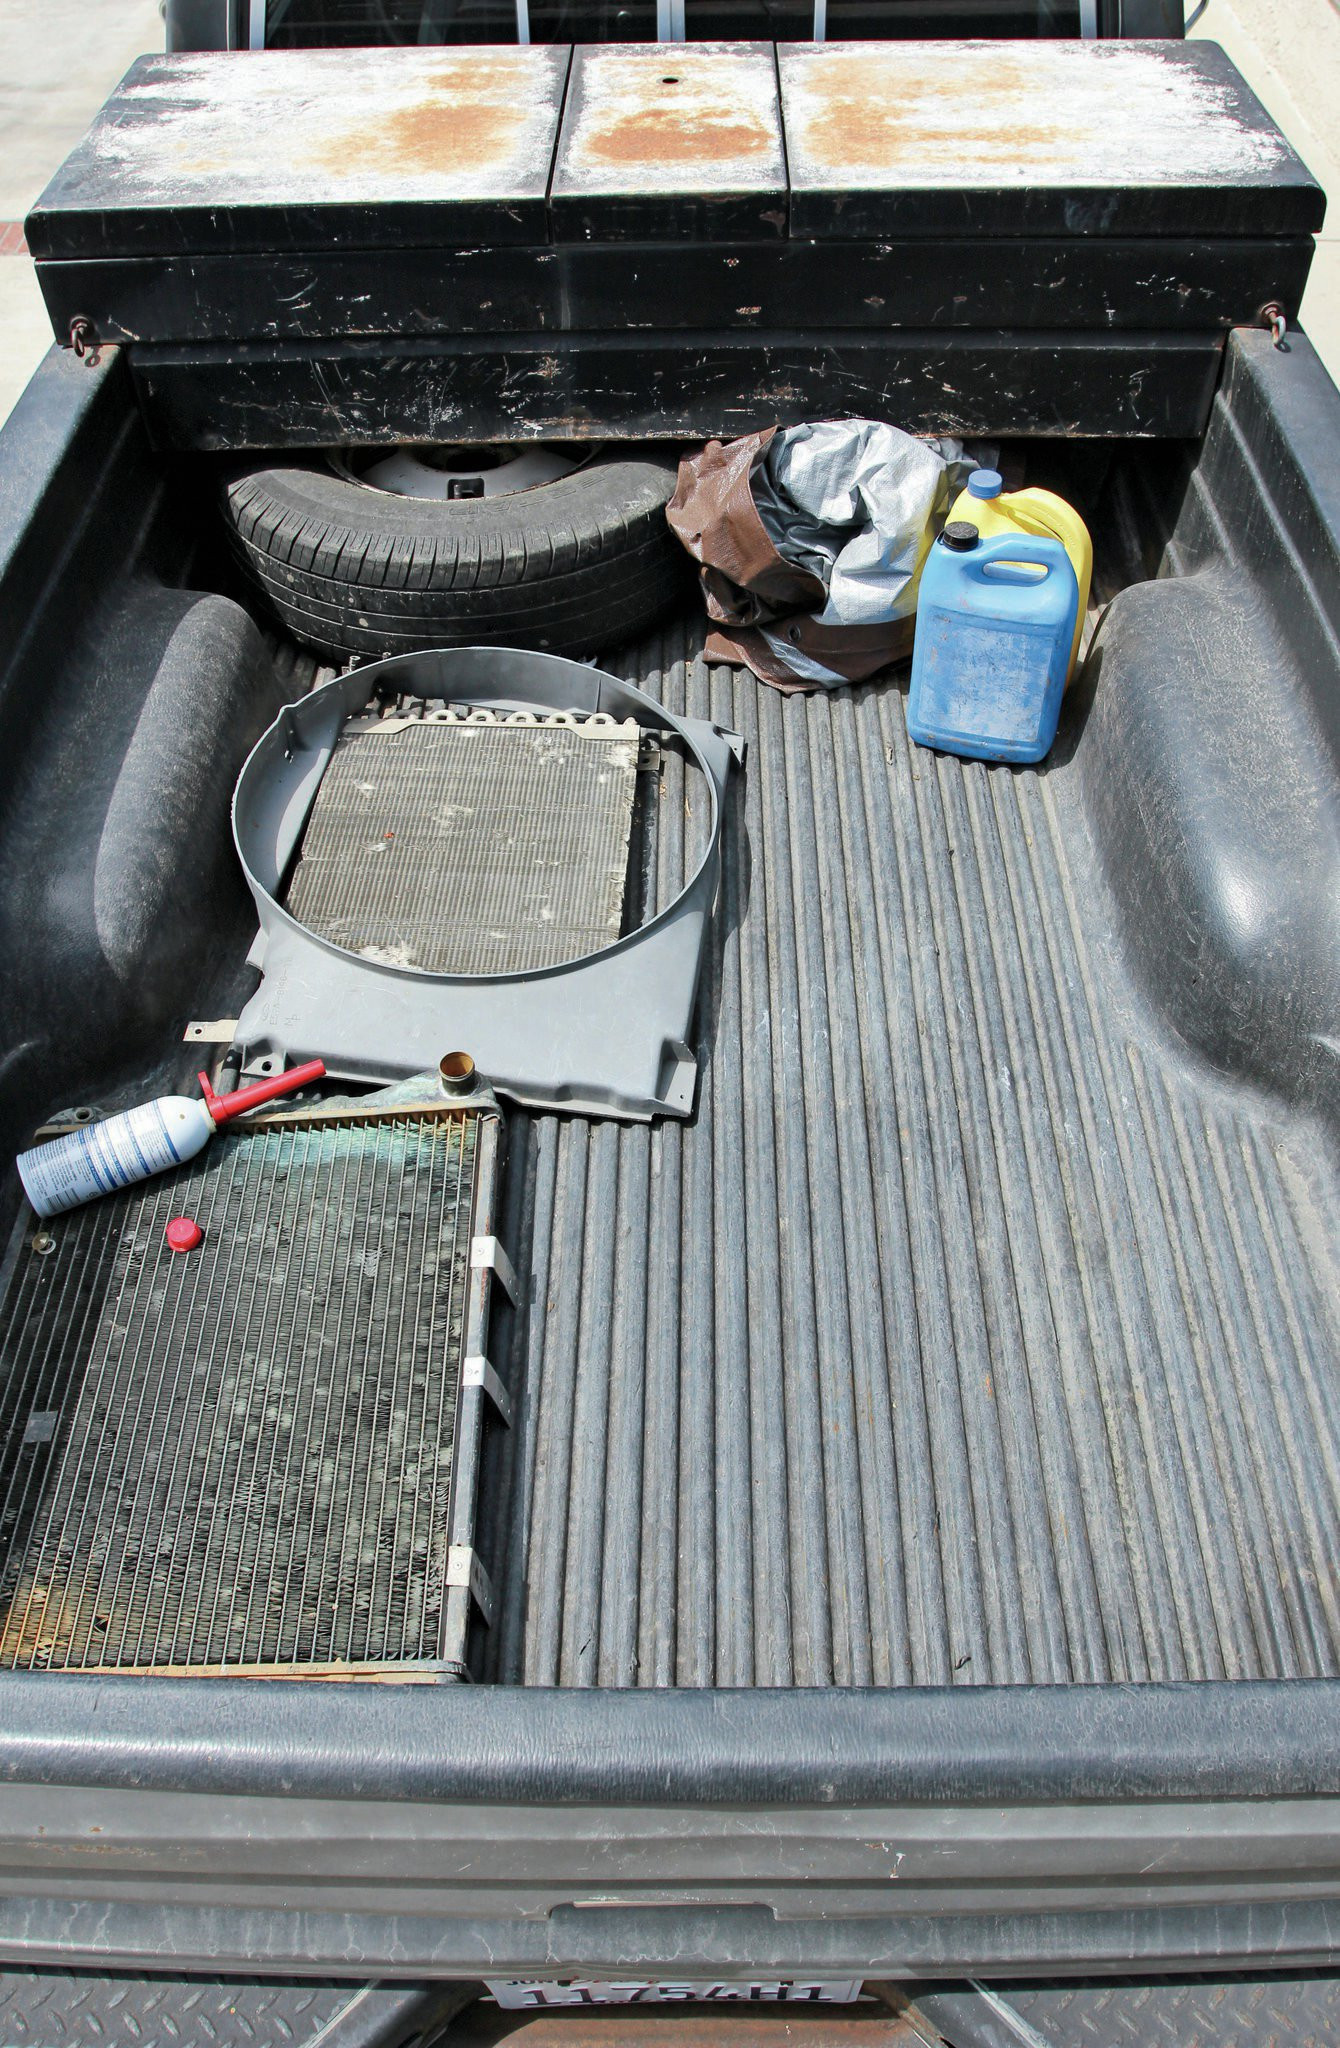 Best ideas about DIY Roll On Bedliner
. Save or Pin Herculiner DIY Roll on Bedliner Kit How to & Image Now.